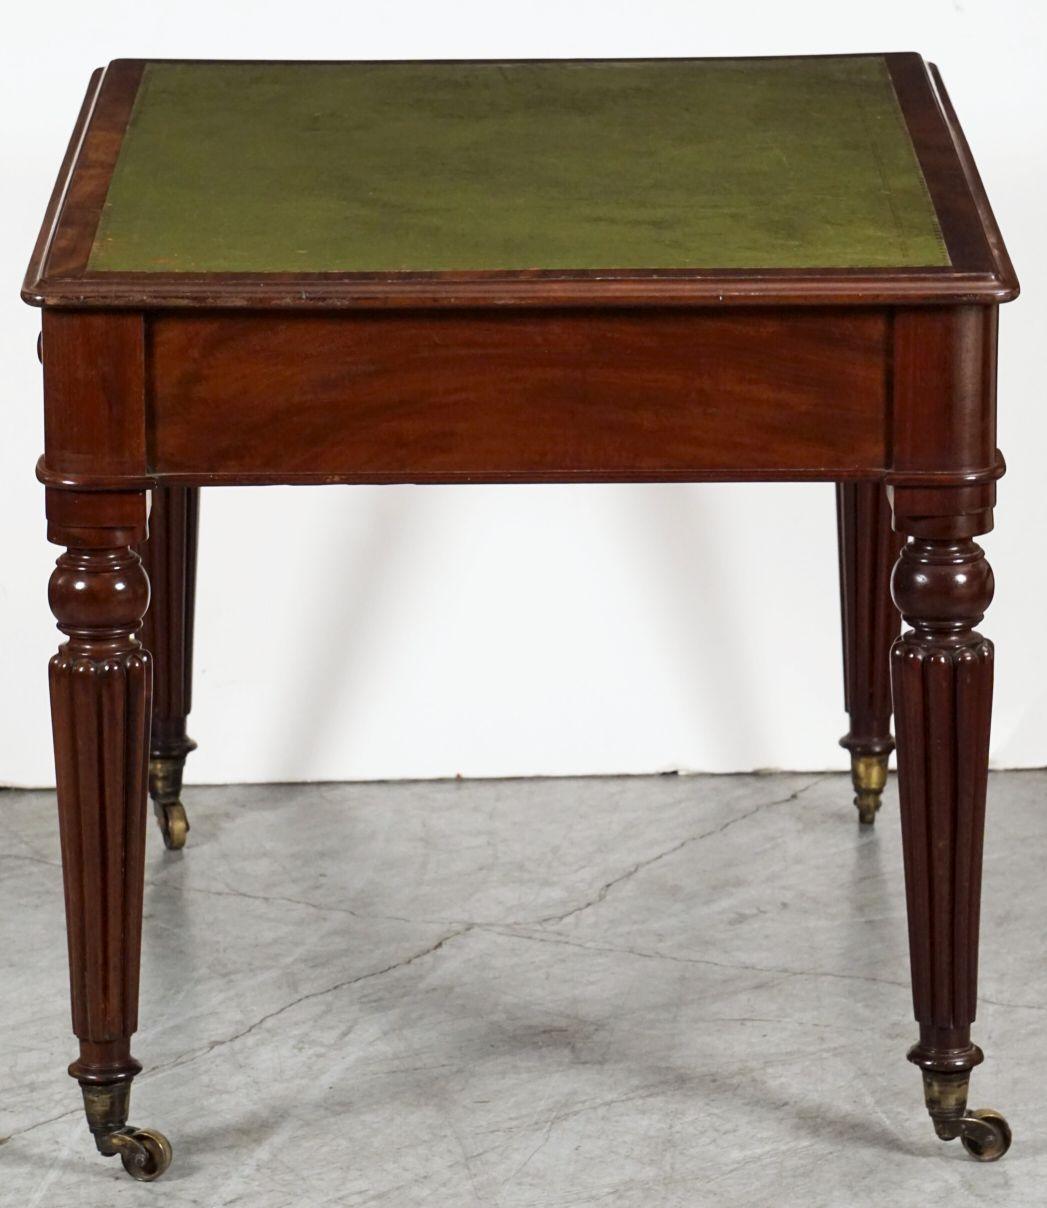 English Writing Table or Desk with Embossed Leather Top in the William IV Style For Sale 4